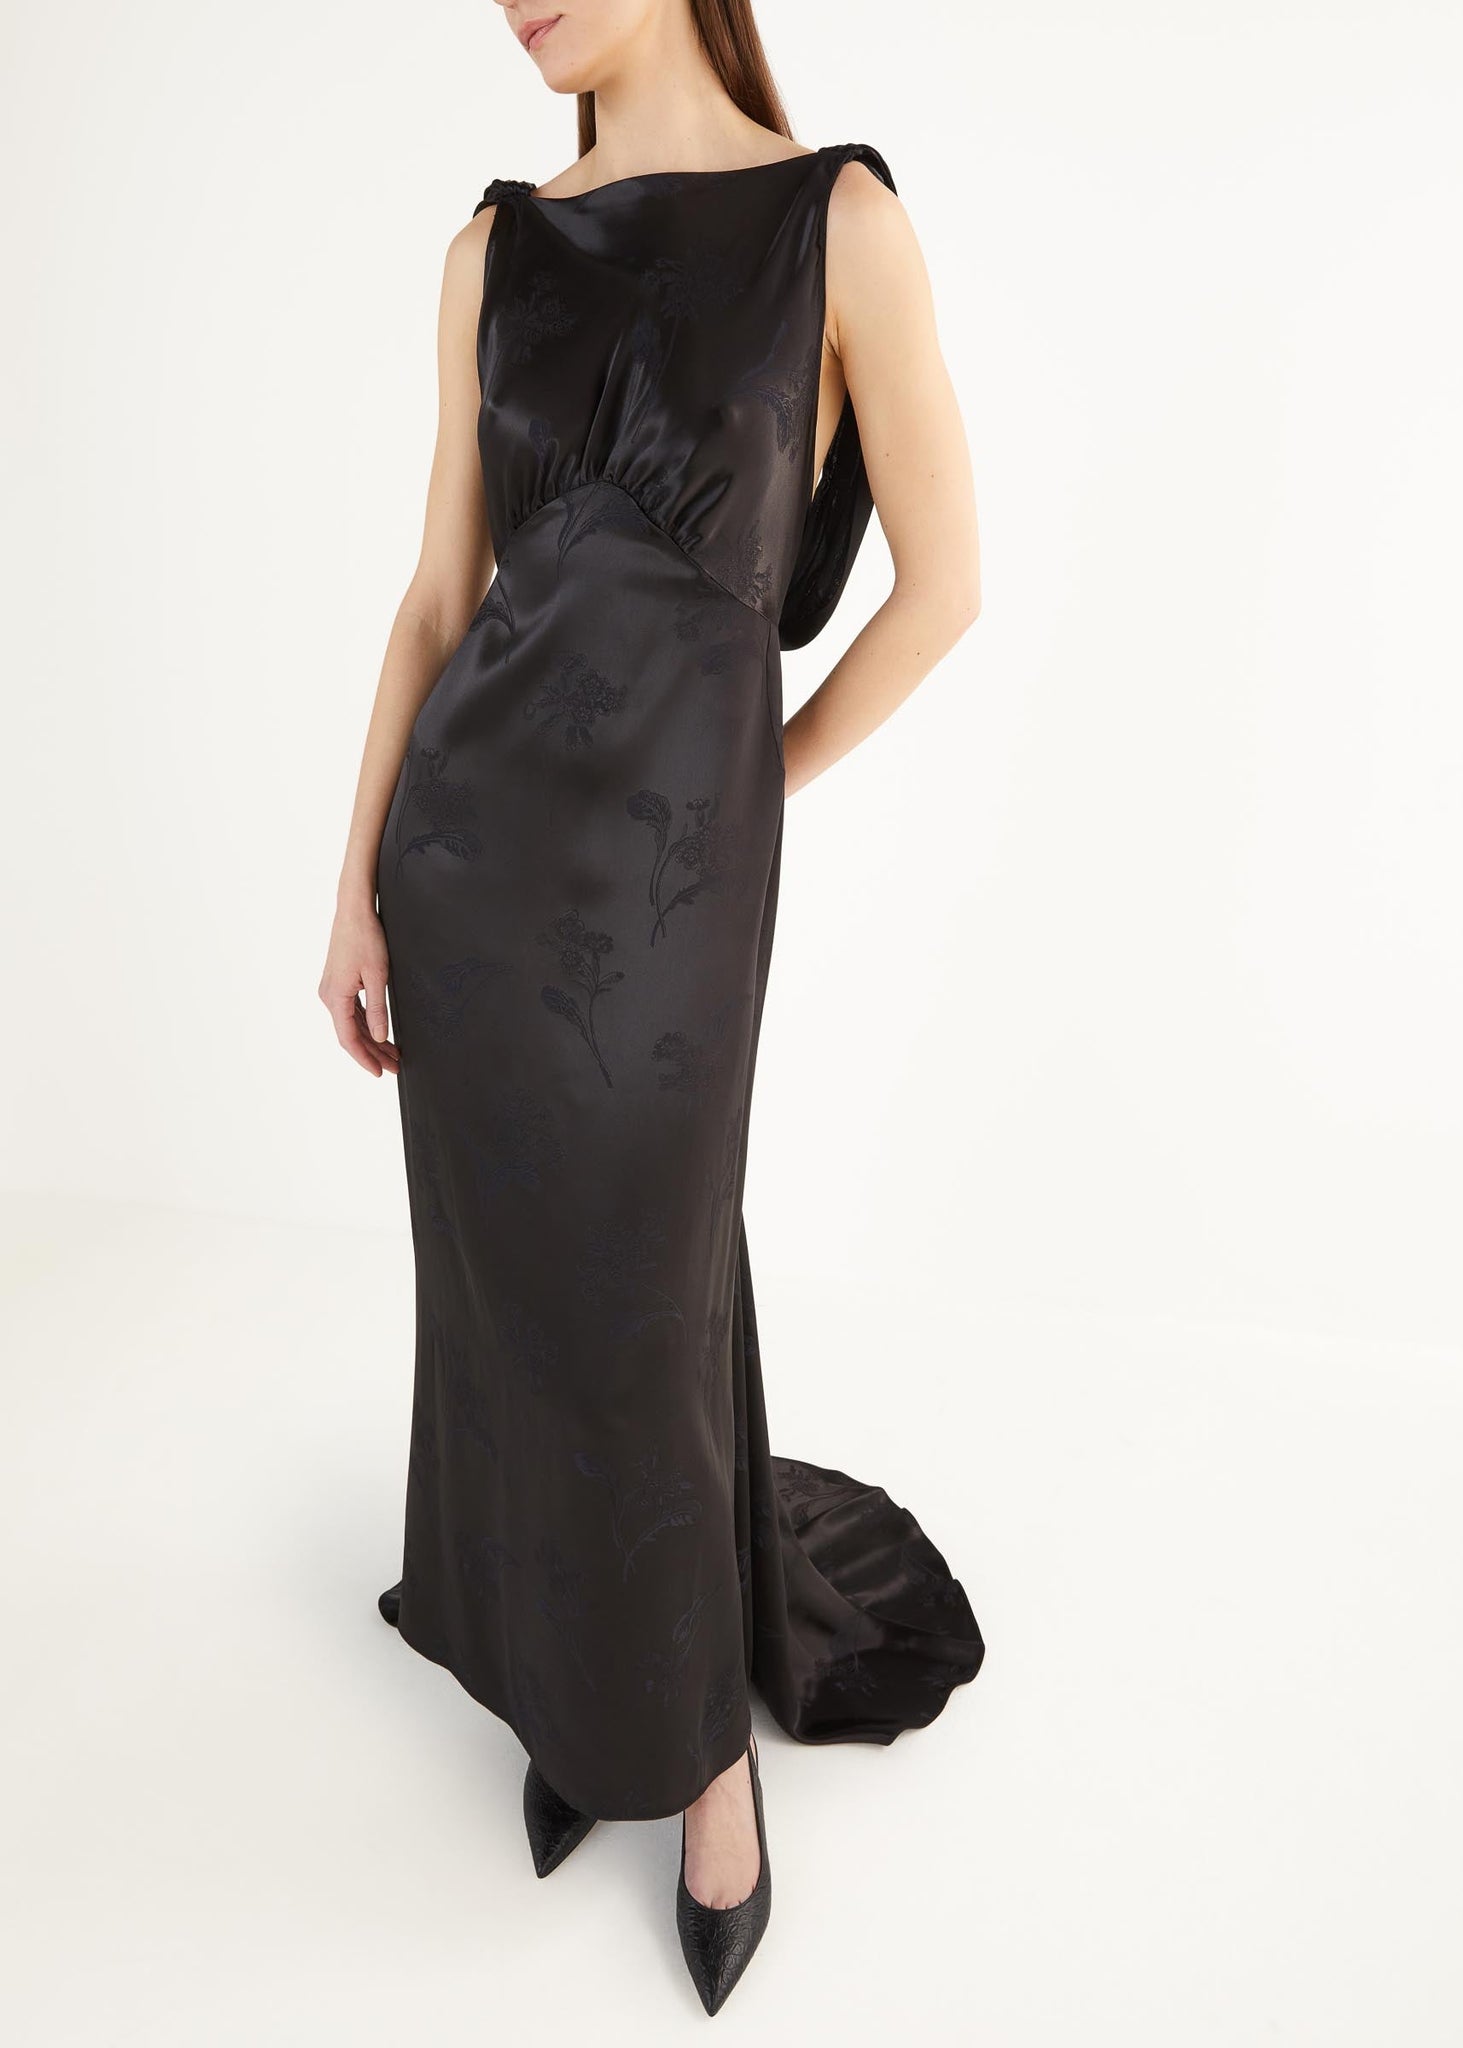 MAE GOWN in BLACK FLORAL SATIN